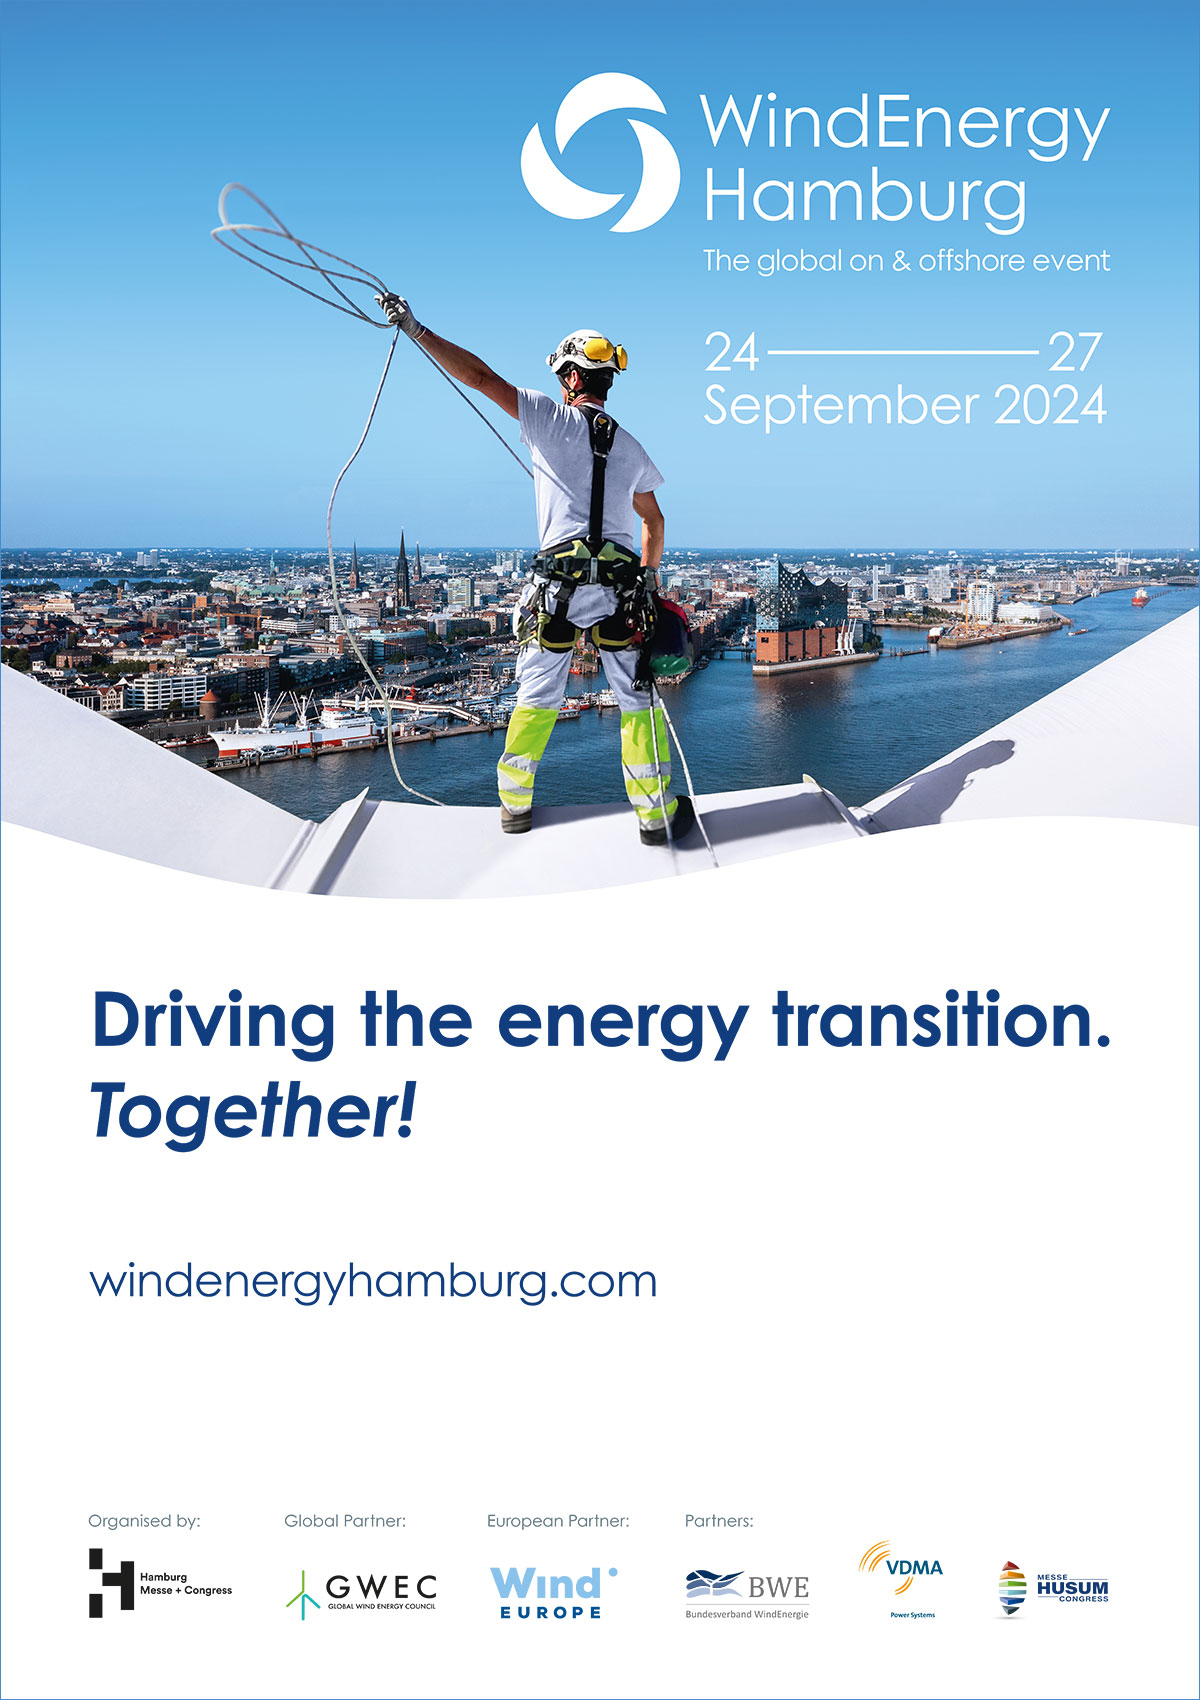 WindEnergy: Driving the energy transition. Together!